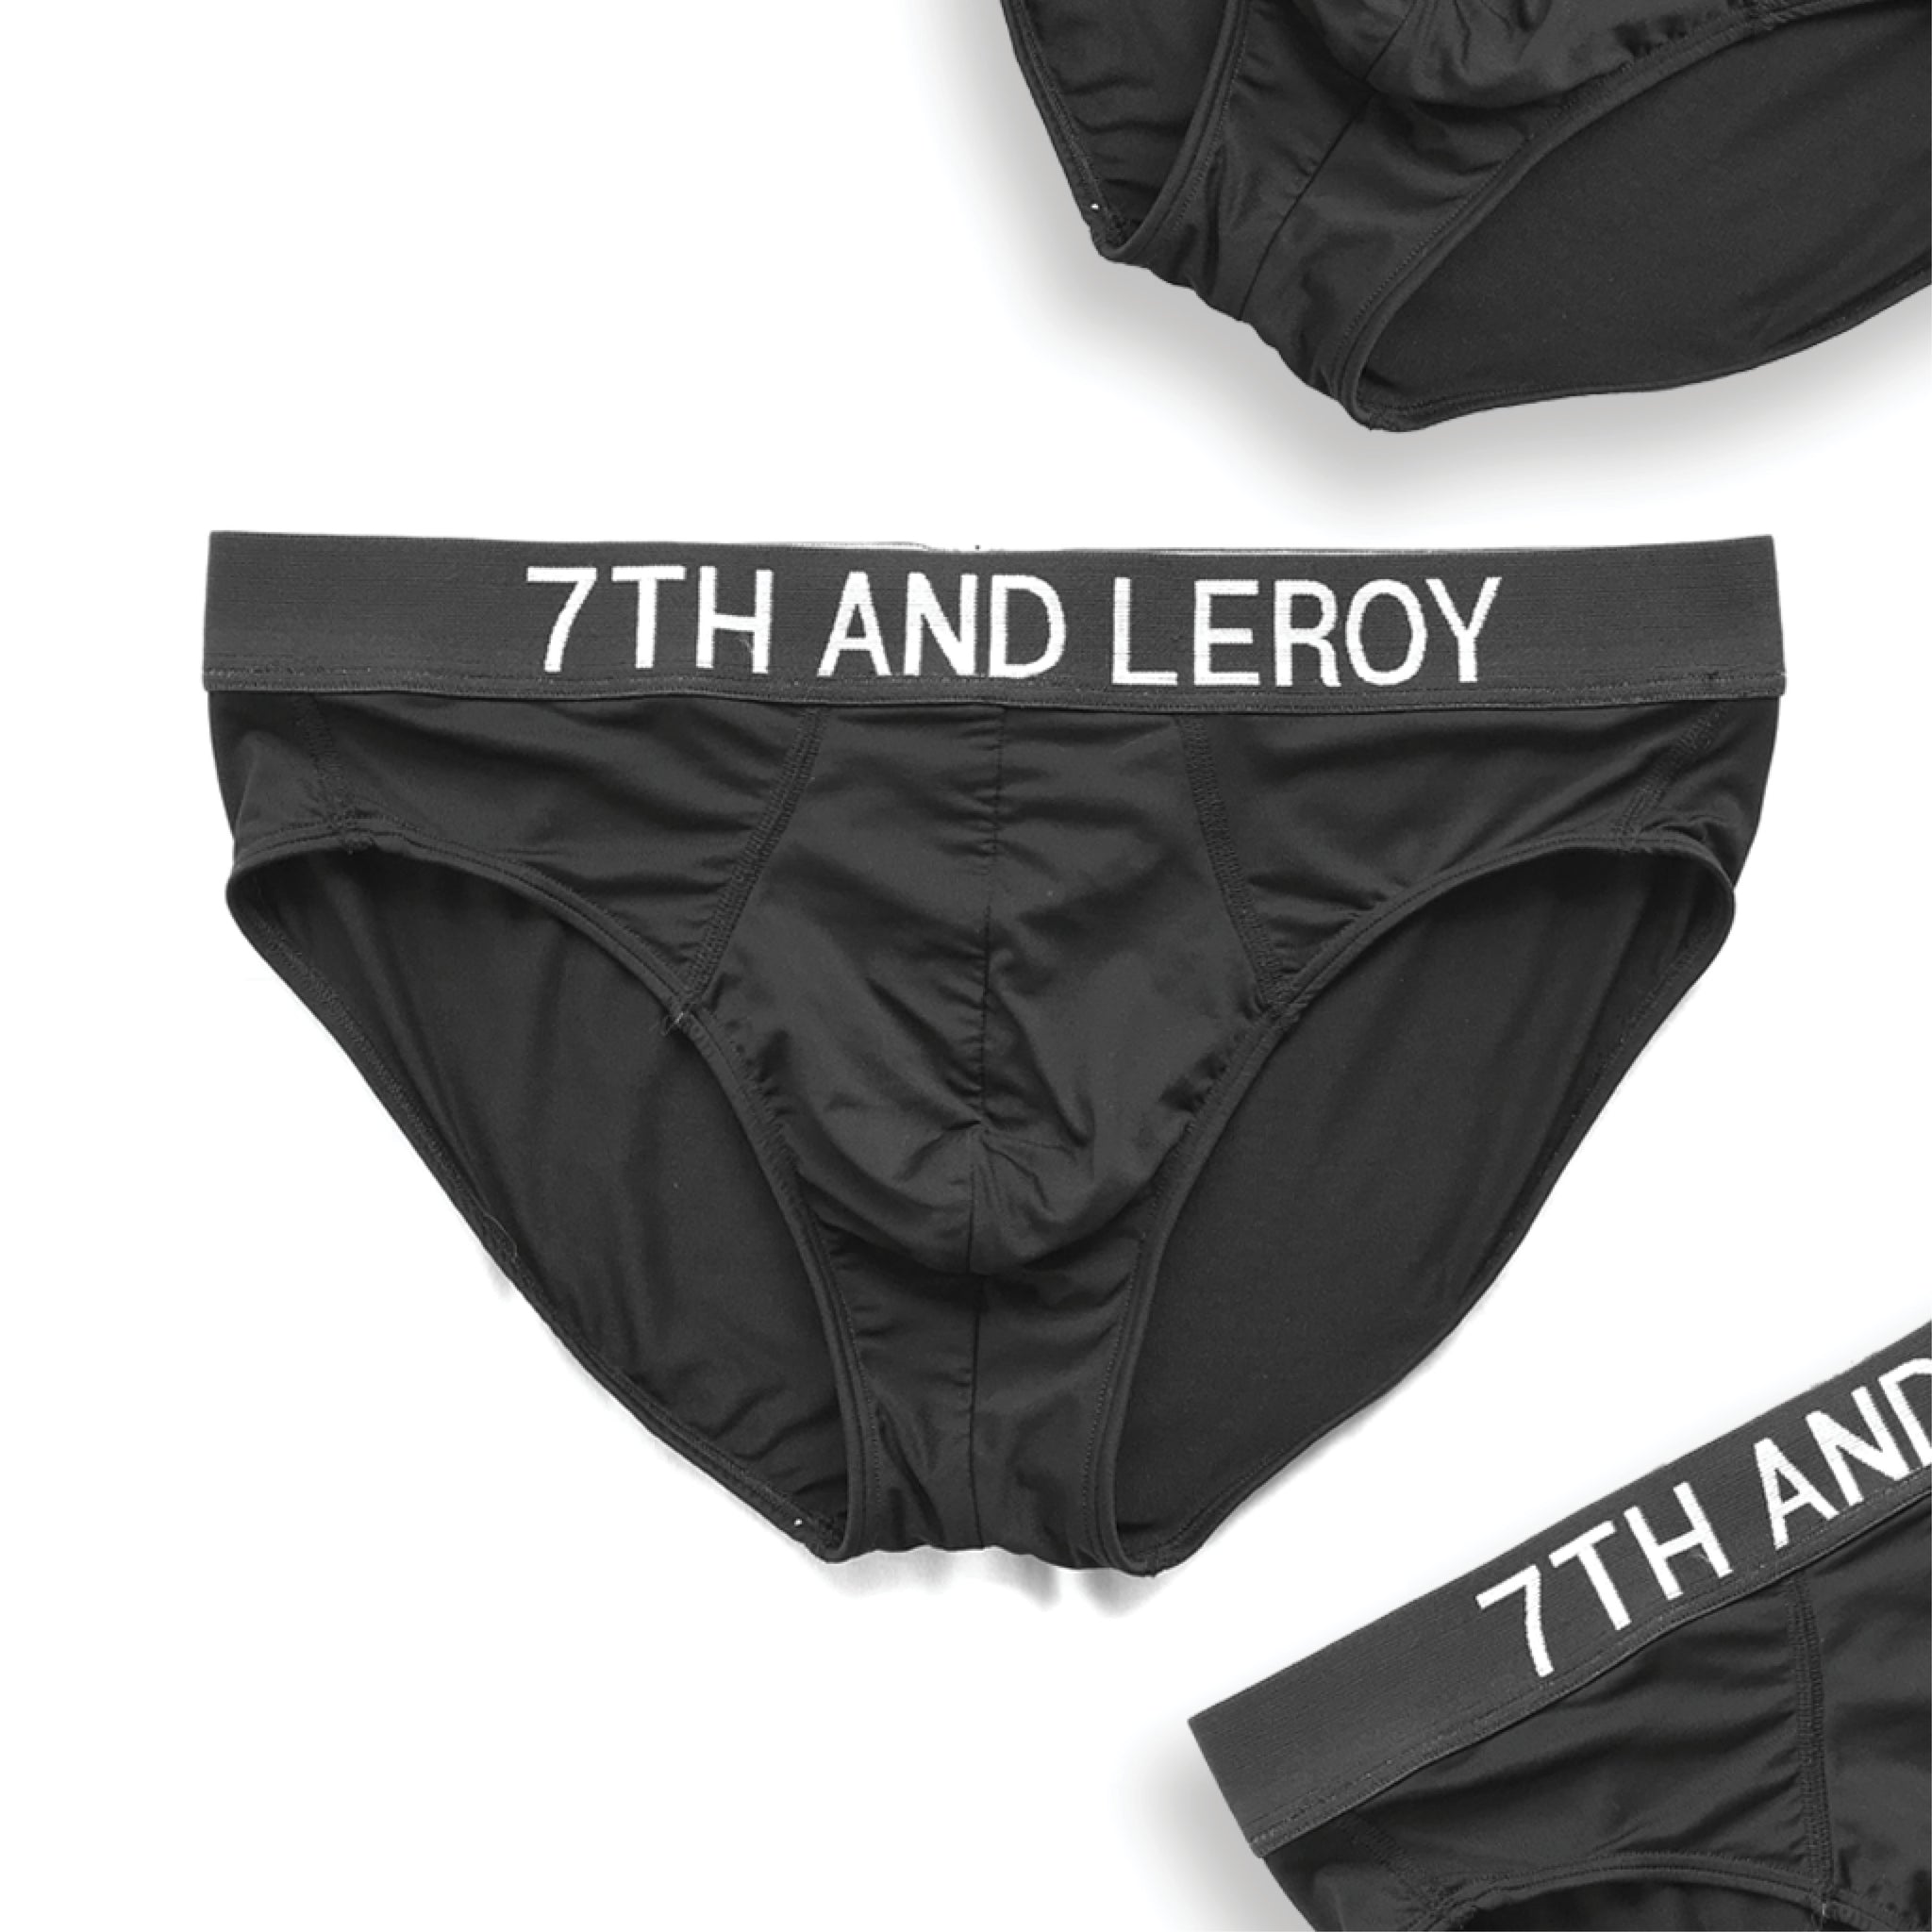 Mens Performance Brief by Polartec® - 7th and Leroy